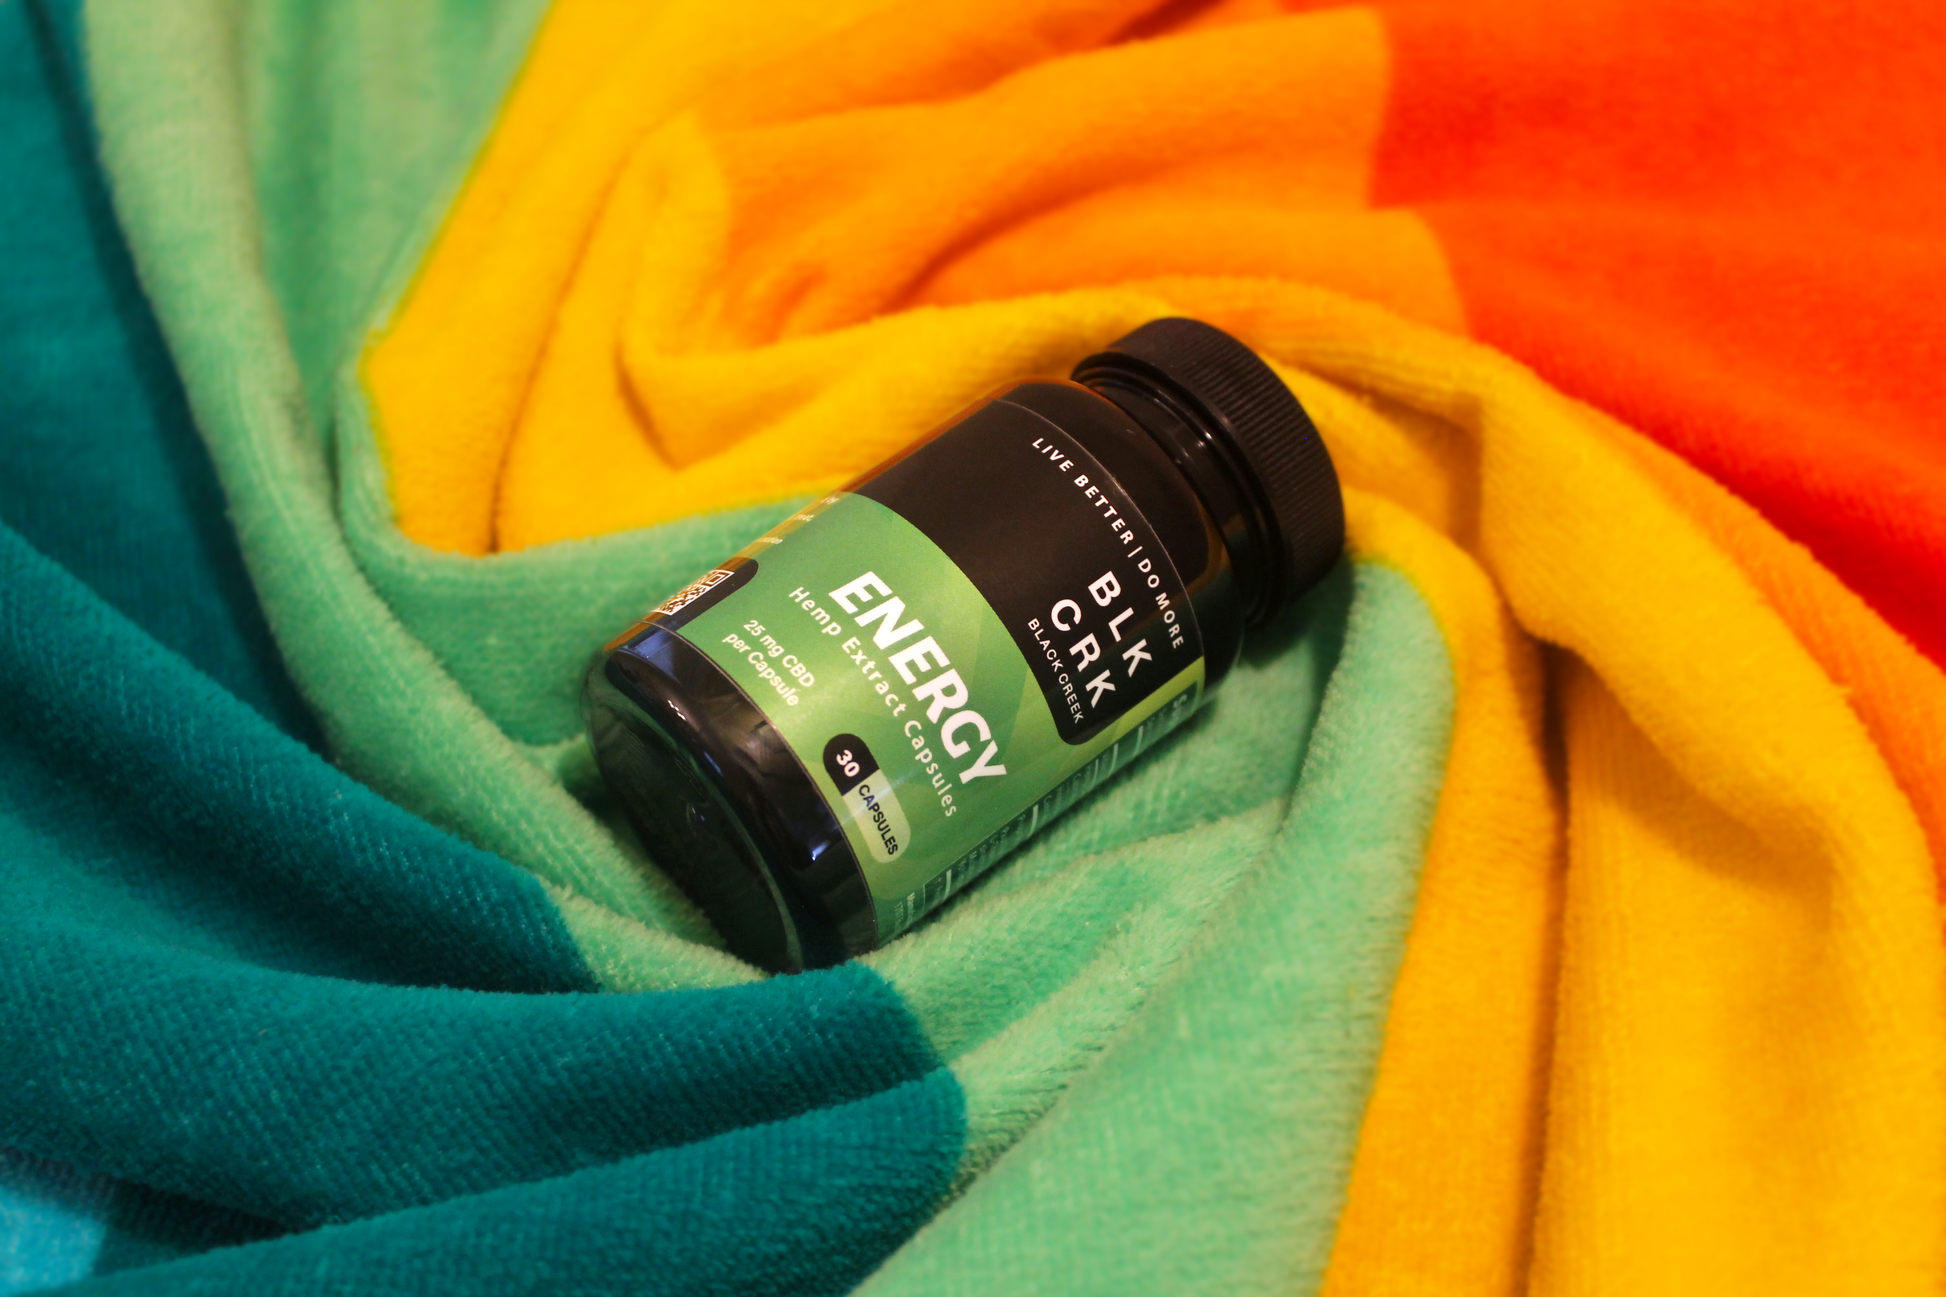 The Black Creek CBD Energy Capsules are swirled in a colorful beach towel